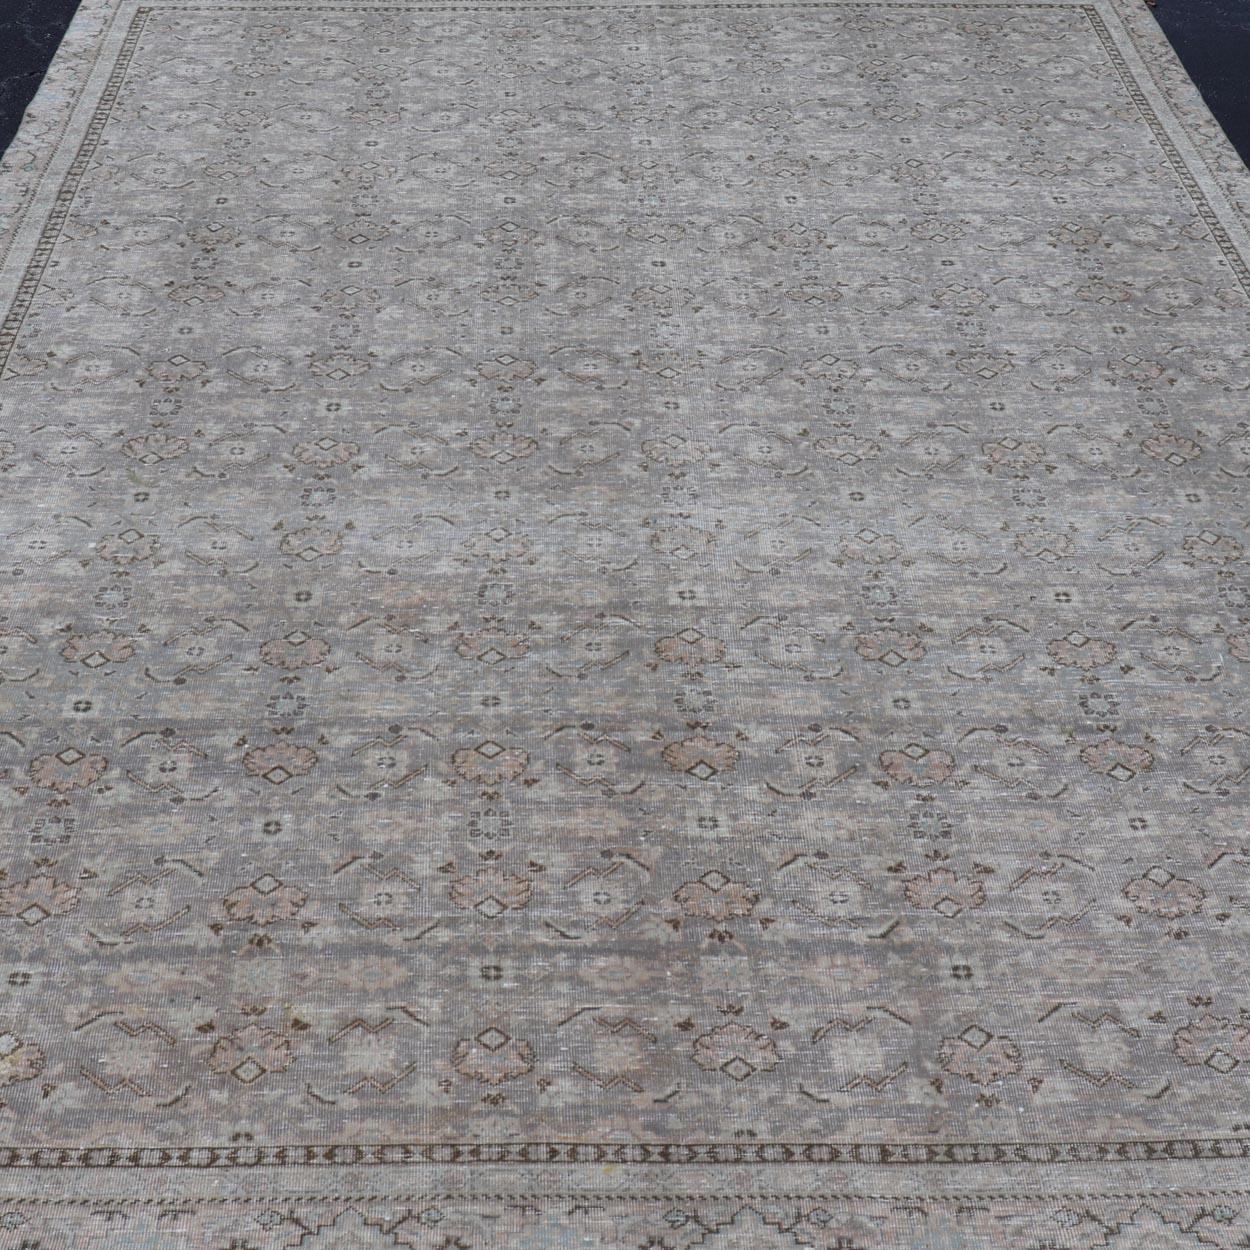 Antique Persian Tabriz Rug in All-Over Herati in Shades of Lavender and Tan  For Sale 4